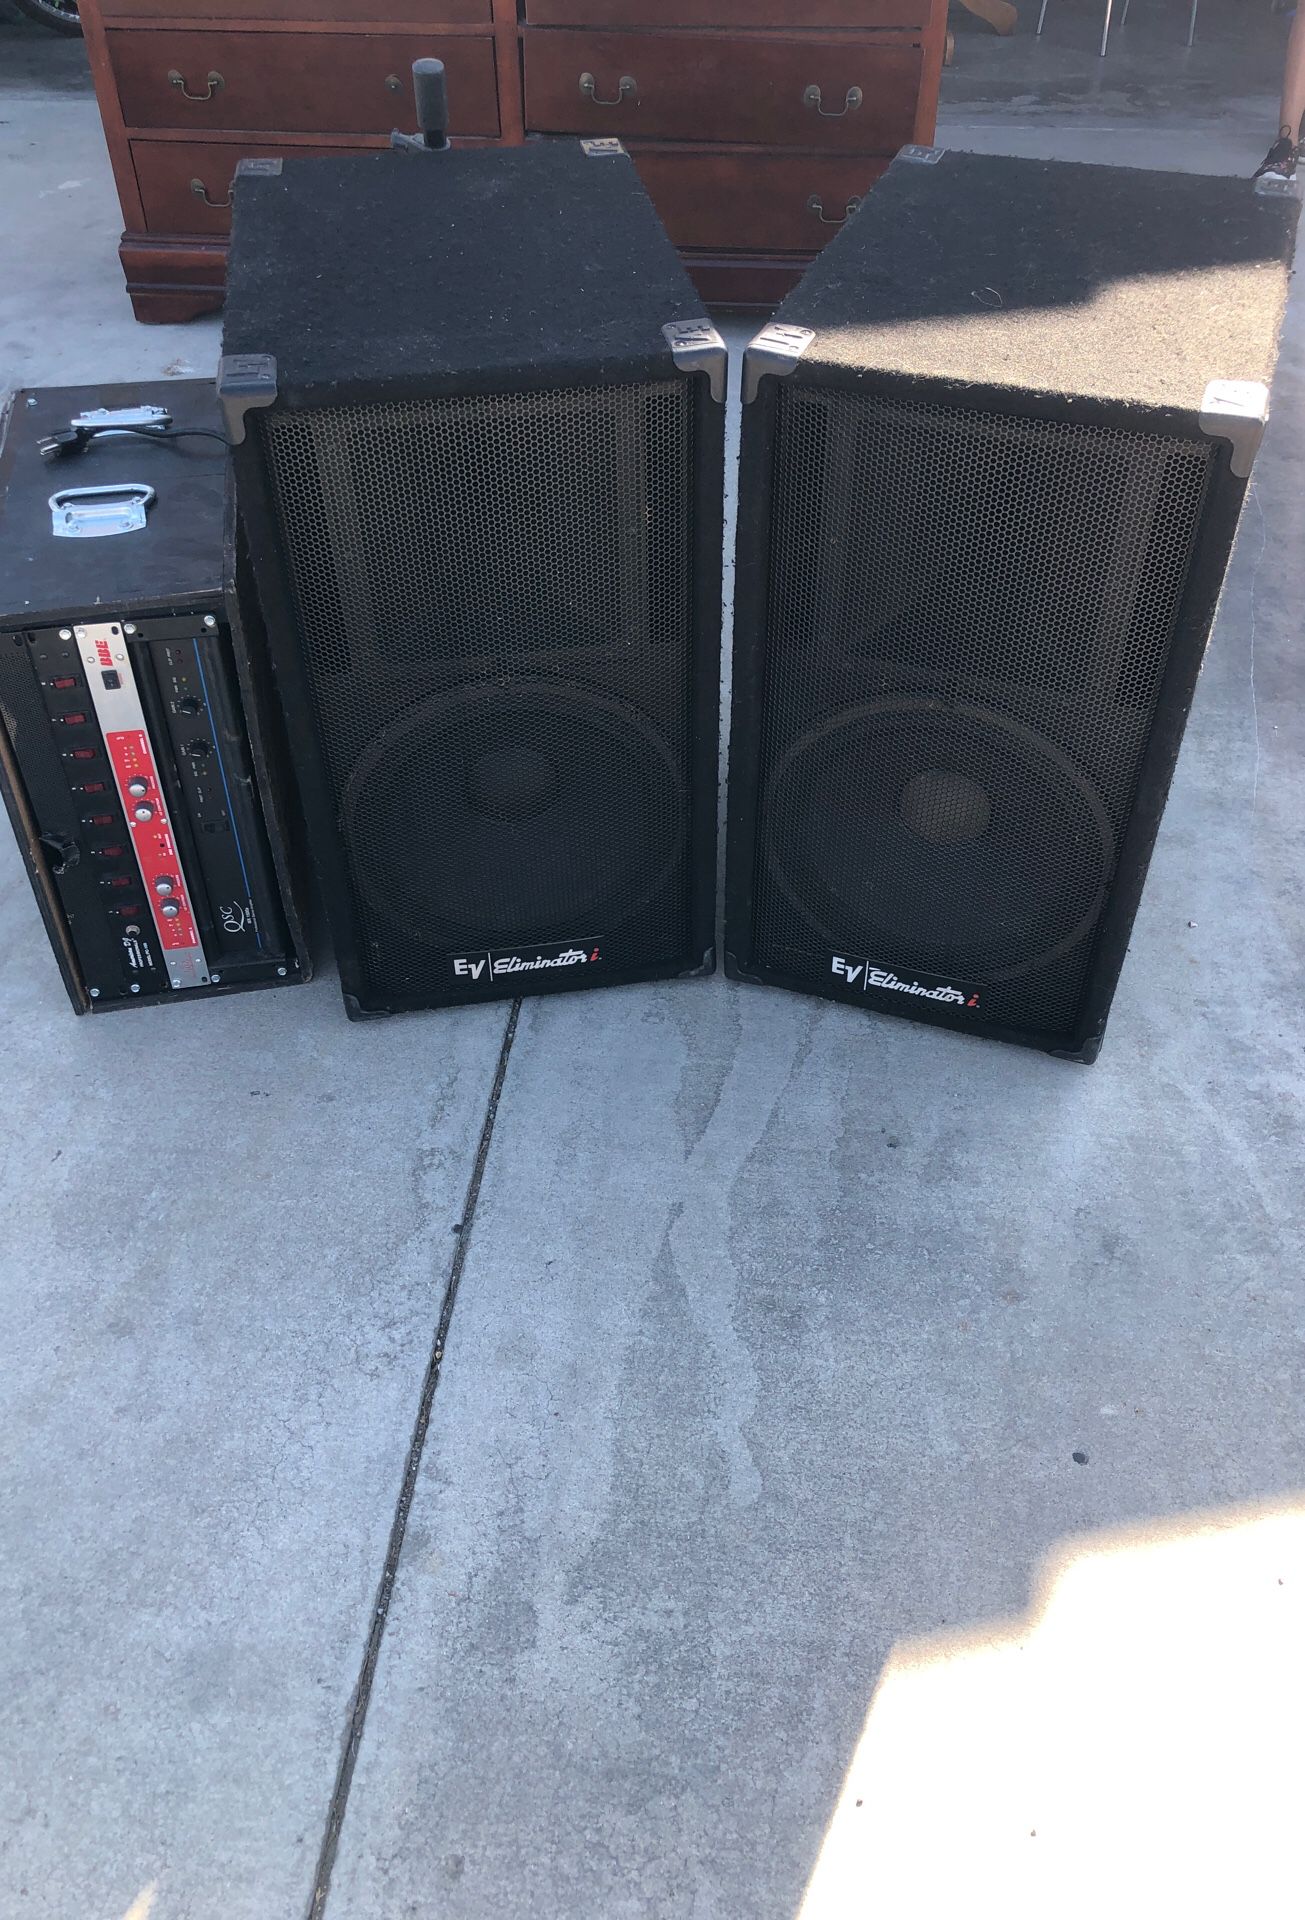 EV pro audio 15inch speakers and QSC amplifier